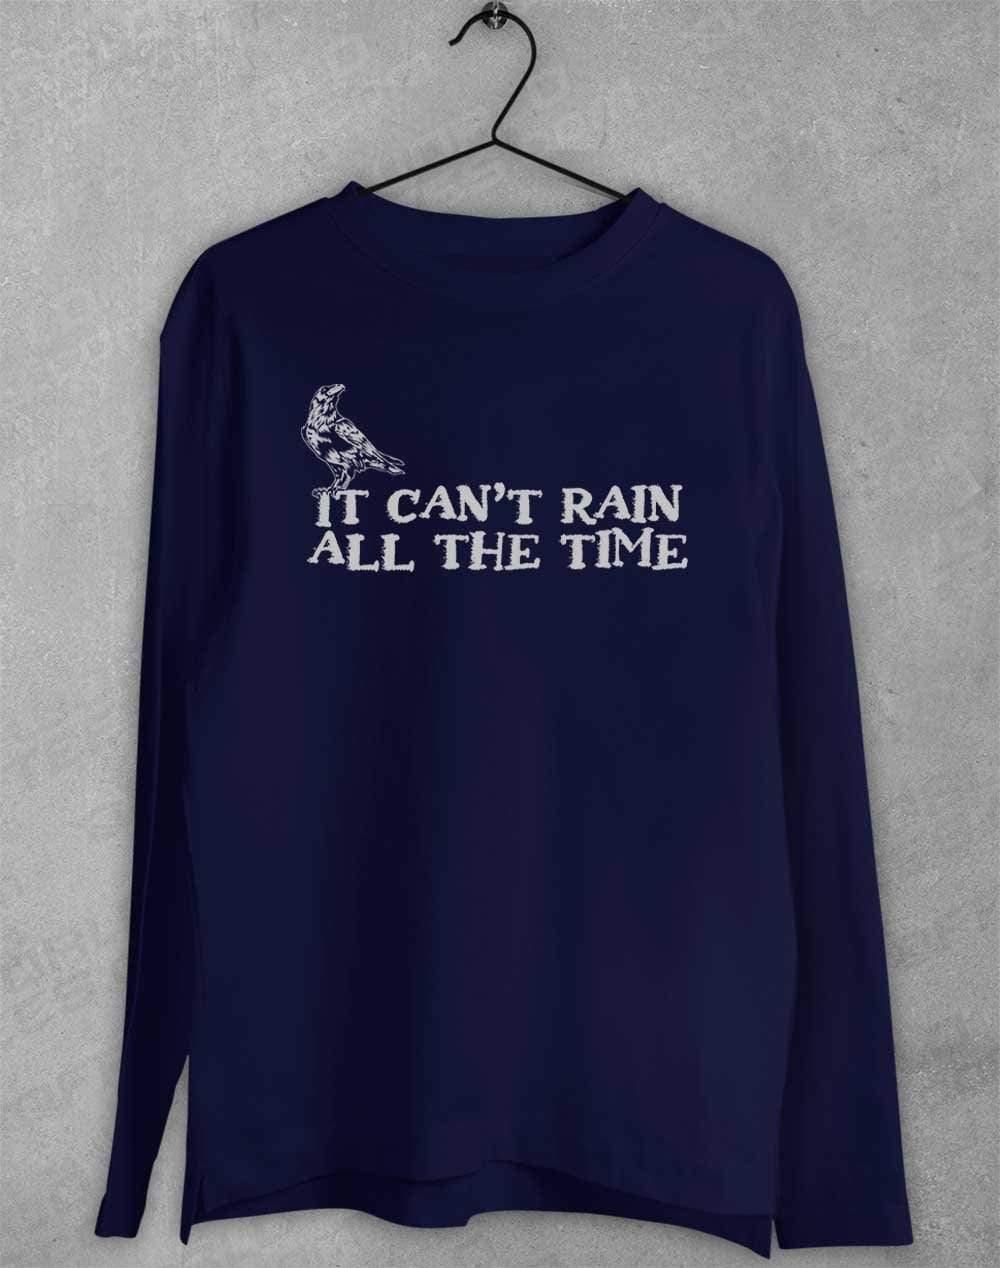 It Can't Rain All the Time Long Sleeve T-Shirt S / Navy  - Off World Tees